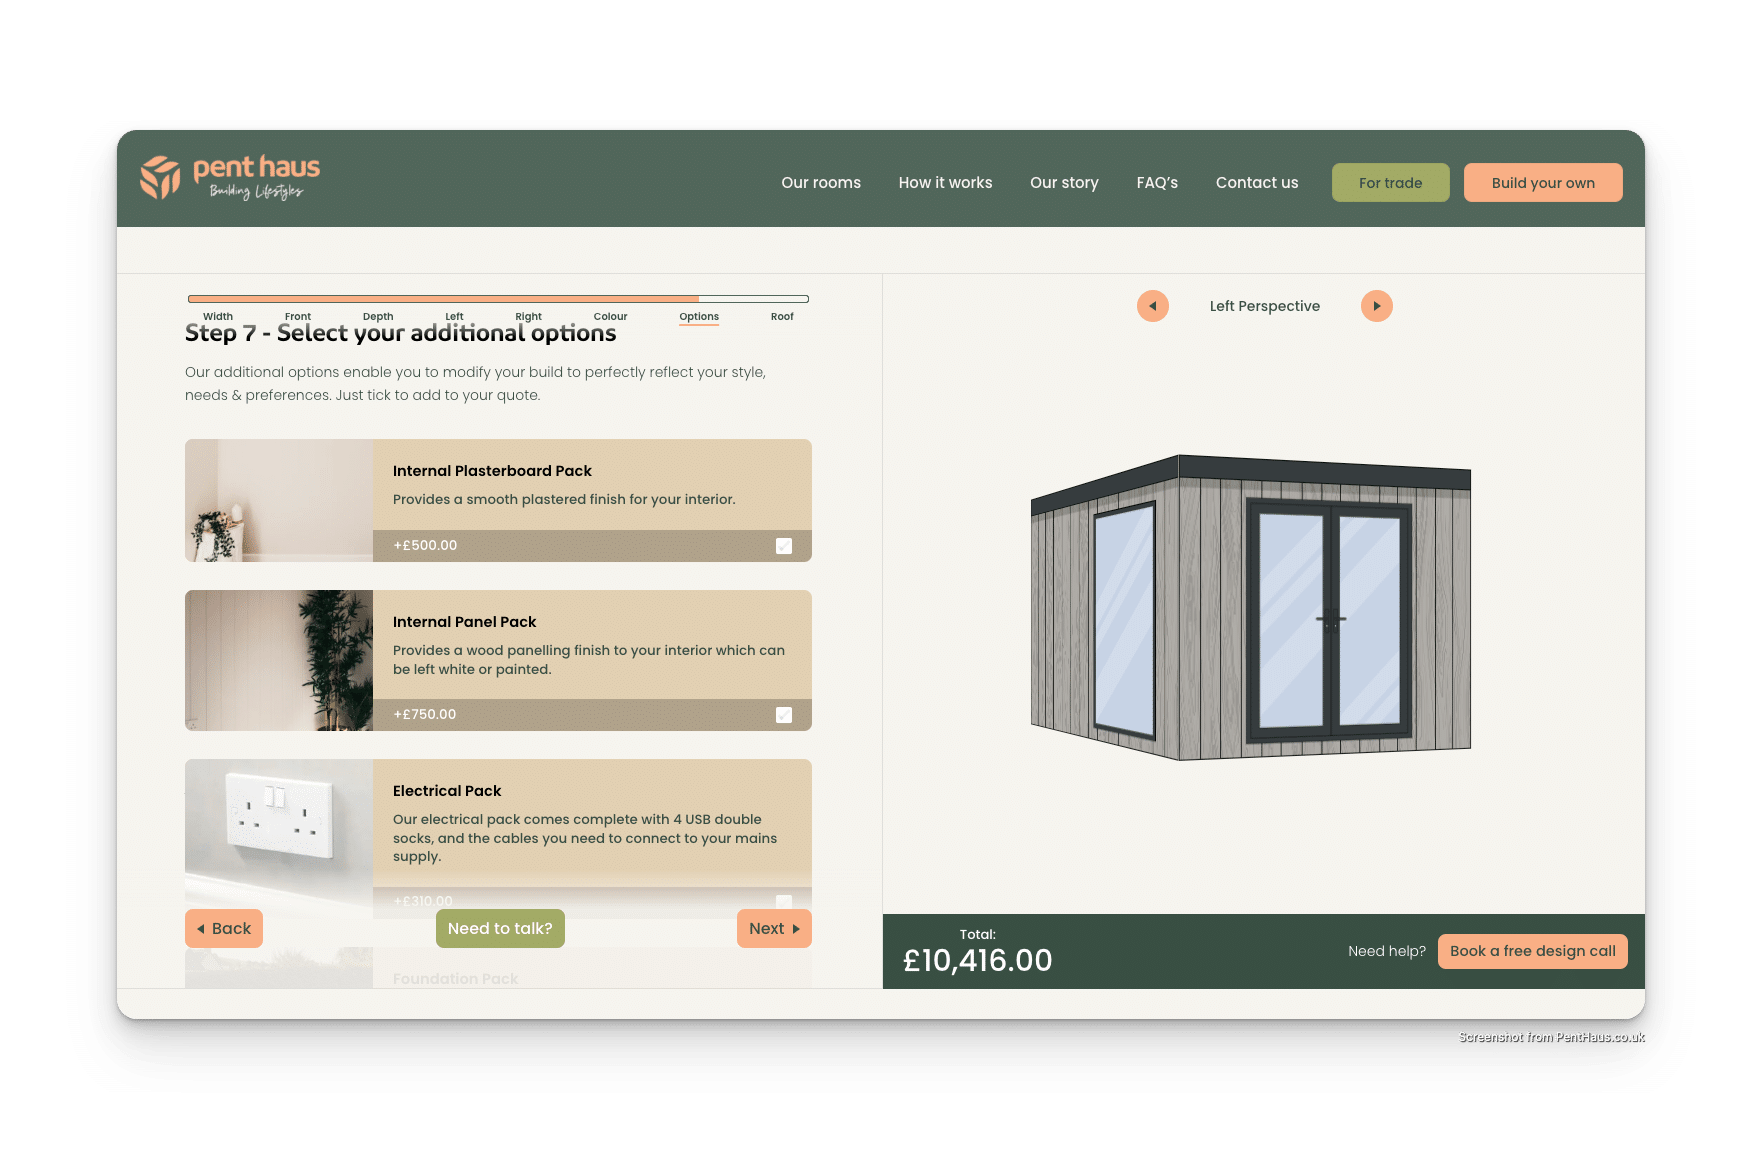 With the Pent Haus configurator you can choose the interior options